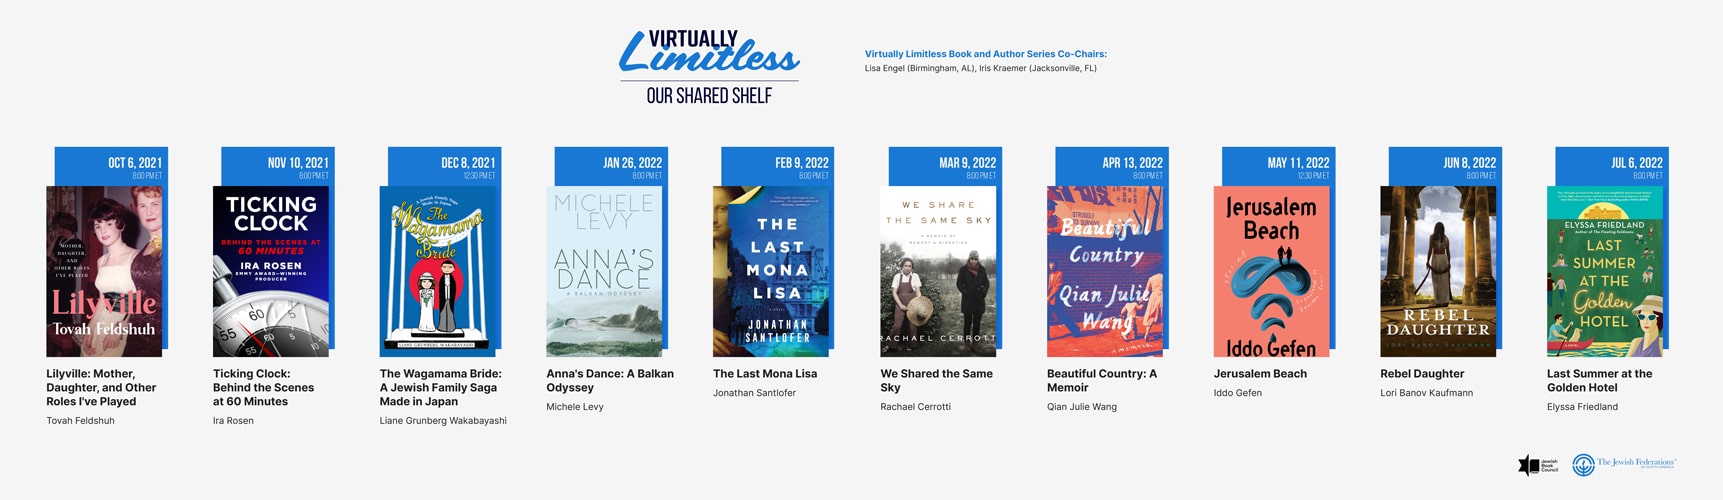 Virtually Limitless: Our Shared Shelf Book and Author Series - Our Shared Shelf Season